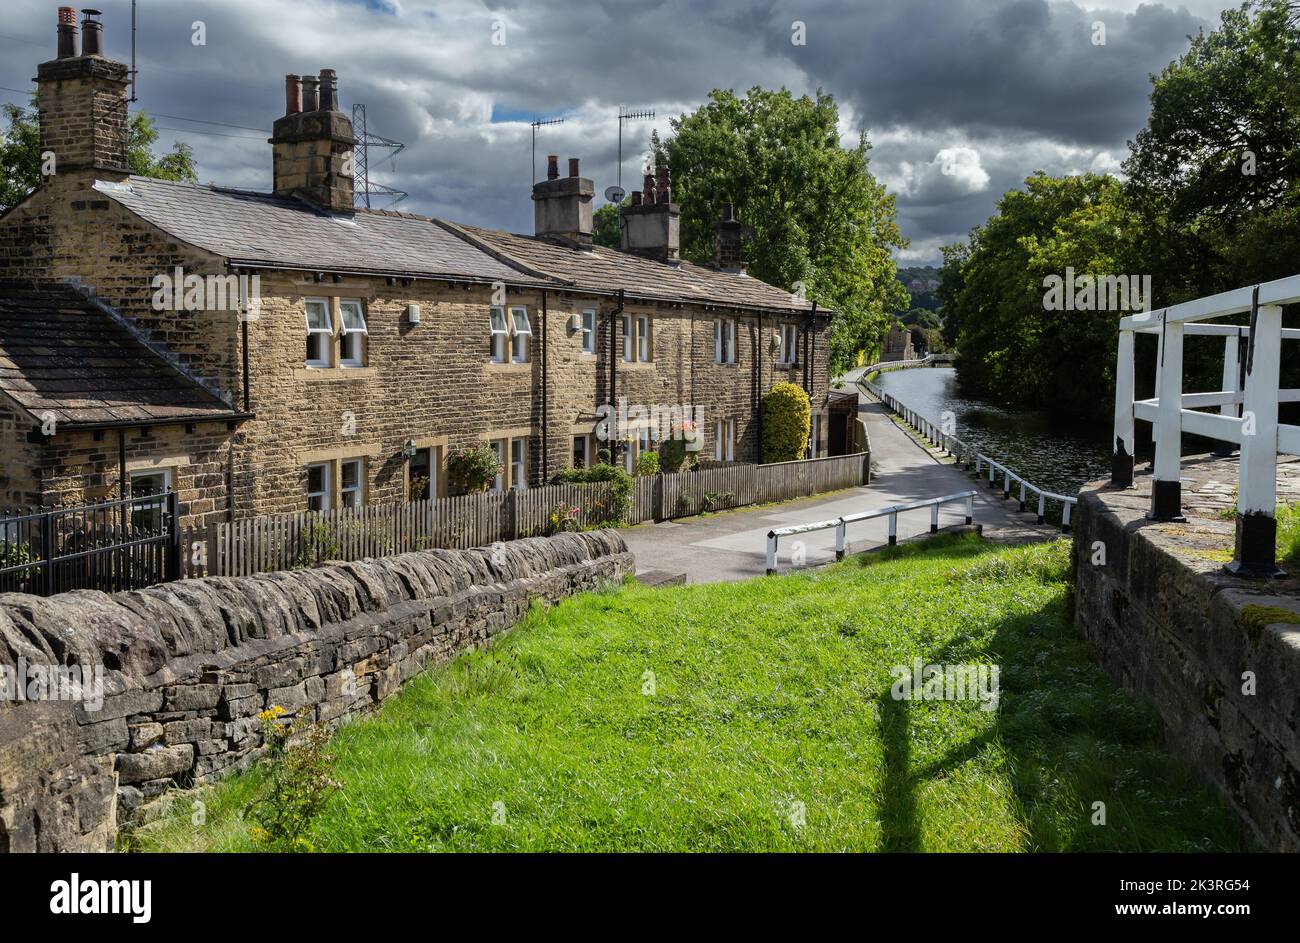 Dobson Lock Cottages next to the Leeds Liverpool Canal at Apperley Bridge, West Yorkshire. These former canal company cottages are Grade ll listed. Stock Photo